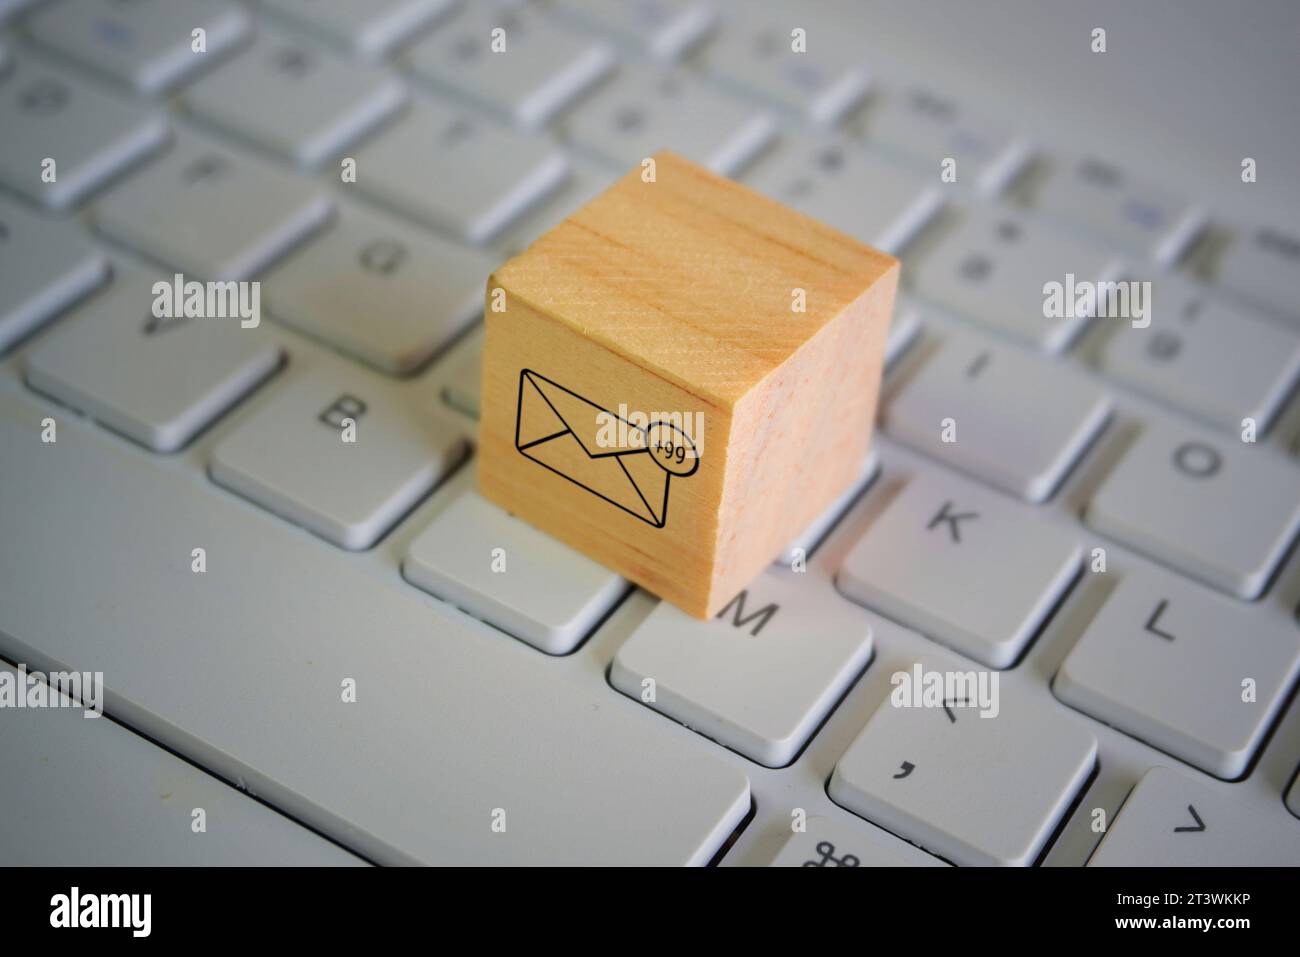 Wooden cube with new email notification icon on top of keyboard. Communication and technology concept Stock Photo